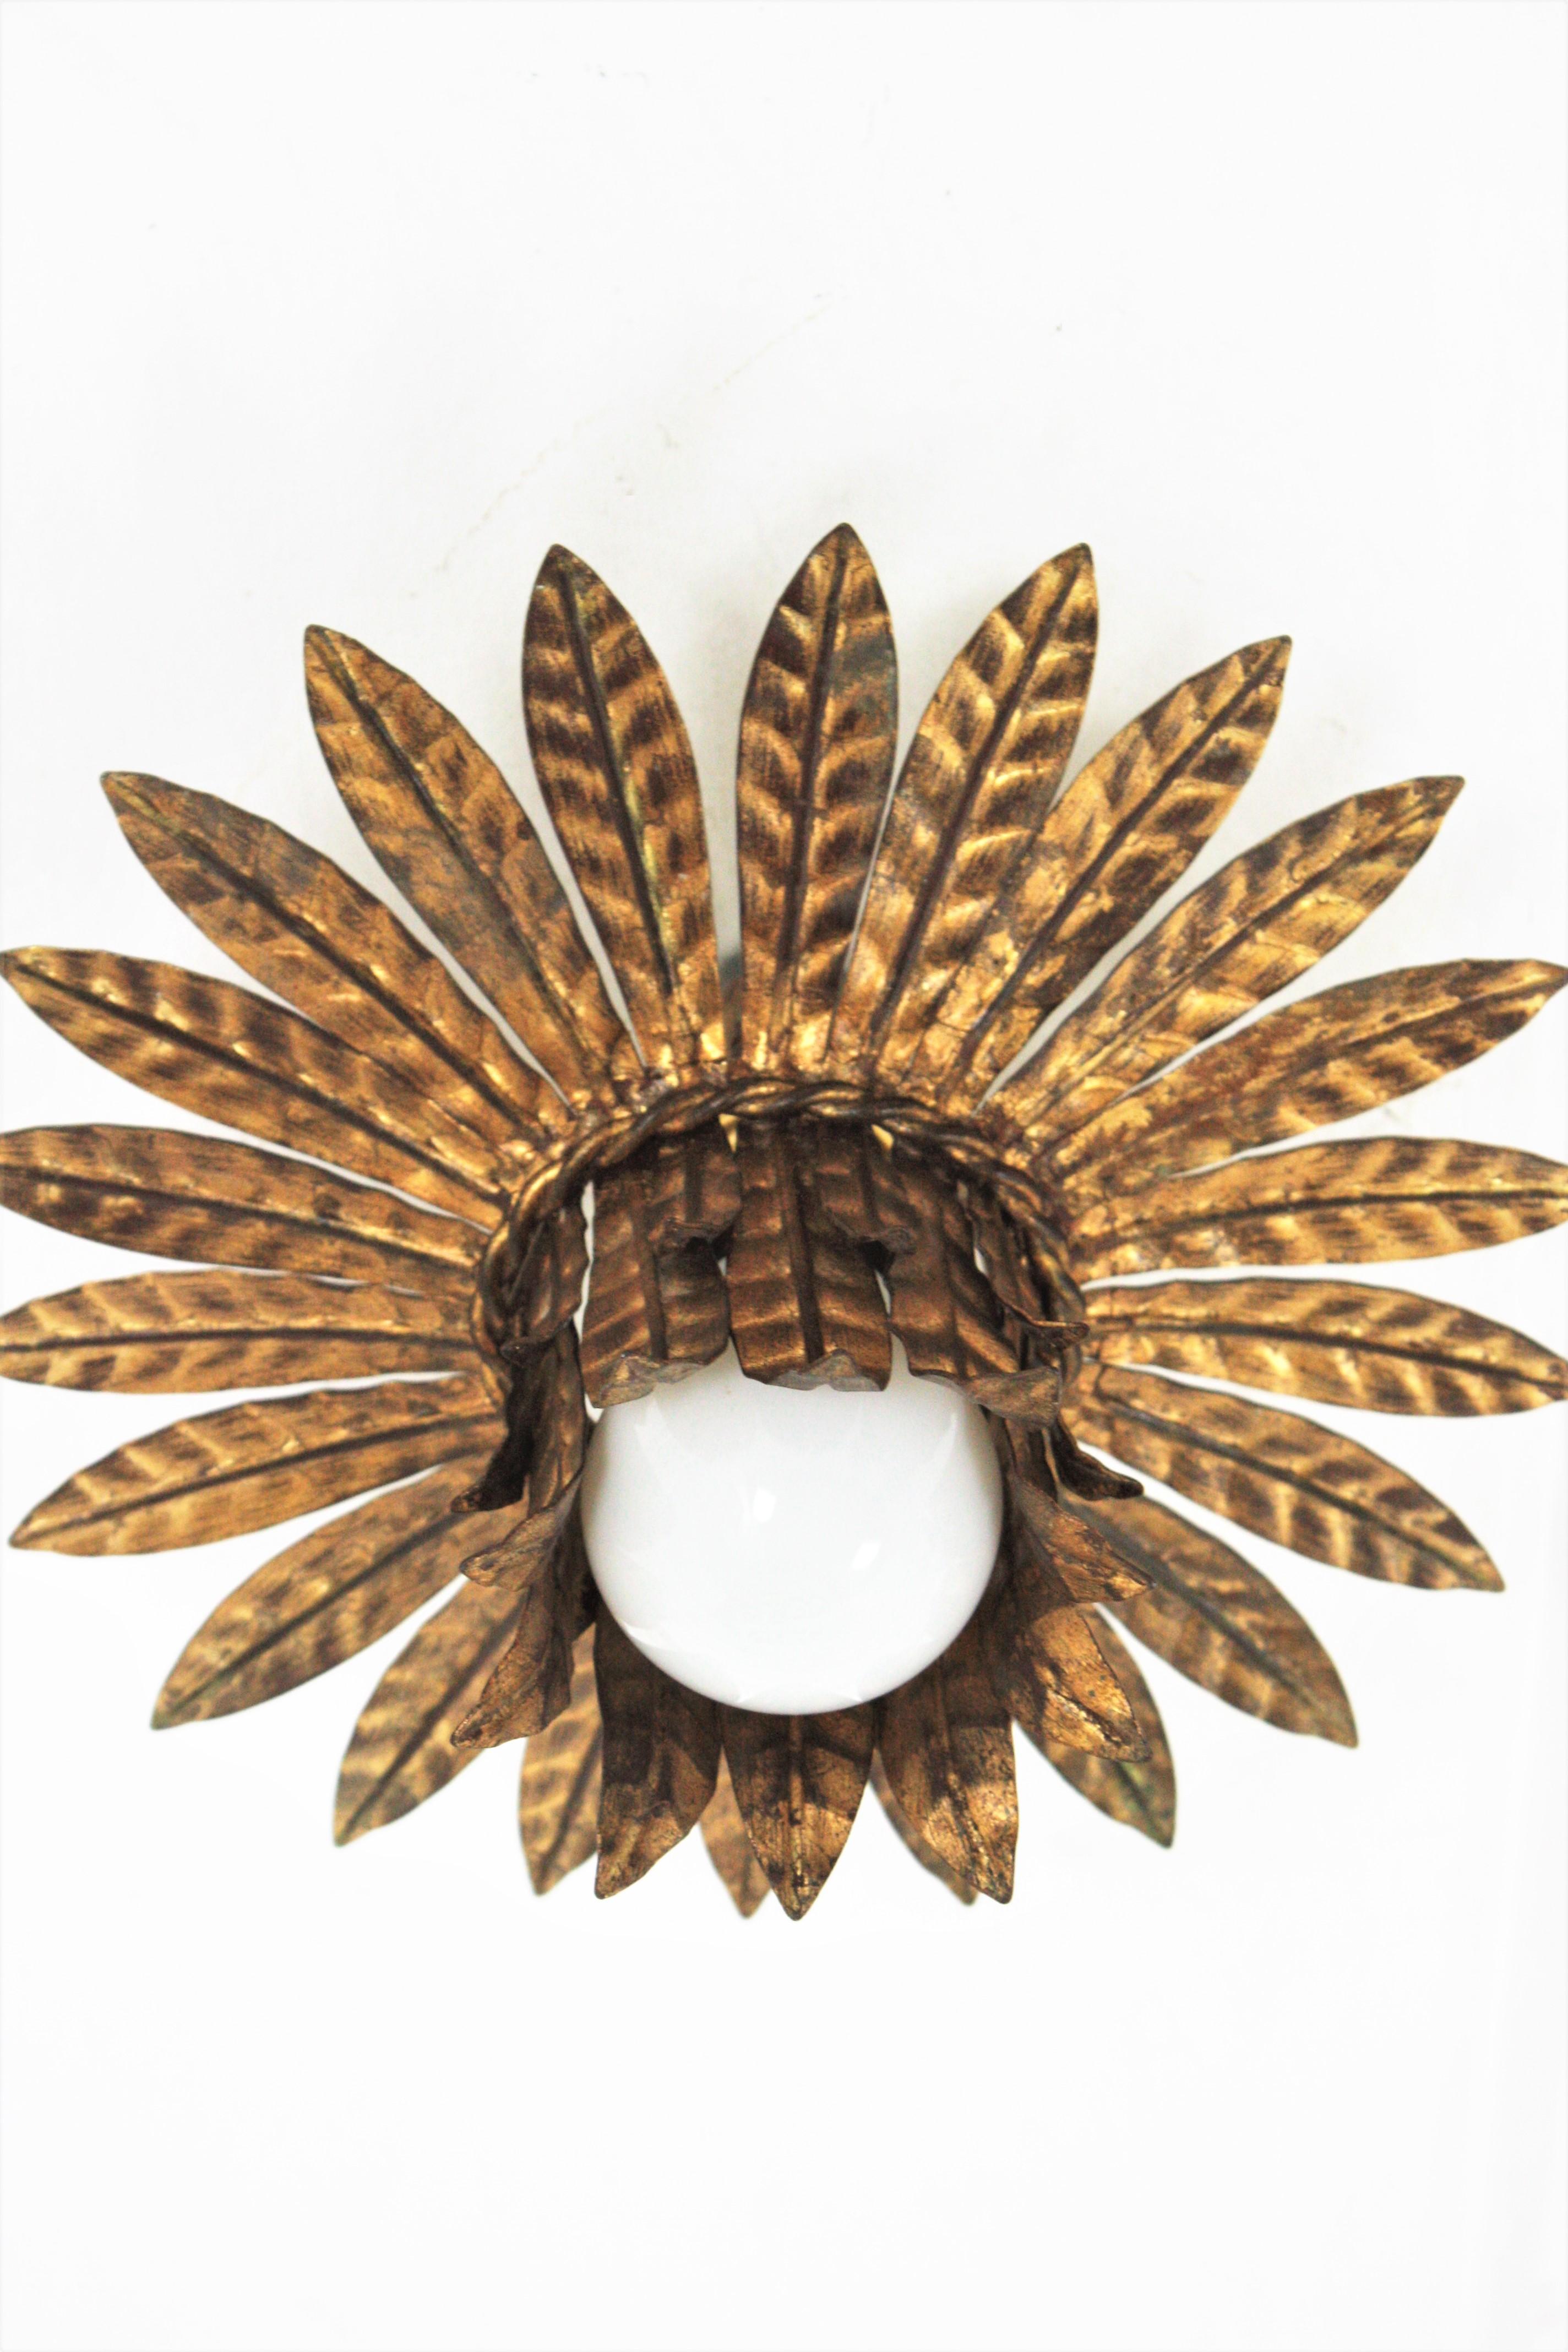 20th Century French Leaves Bouquet Crown Ceiling Light Fixture in Gilt Iron, 1940s For Sale